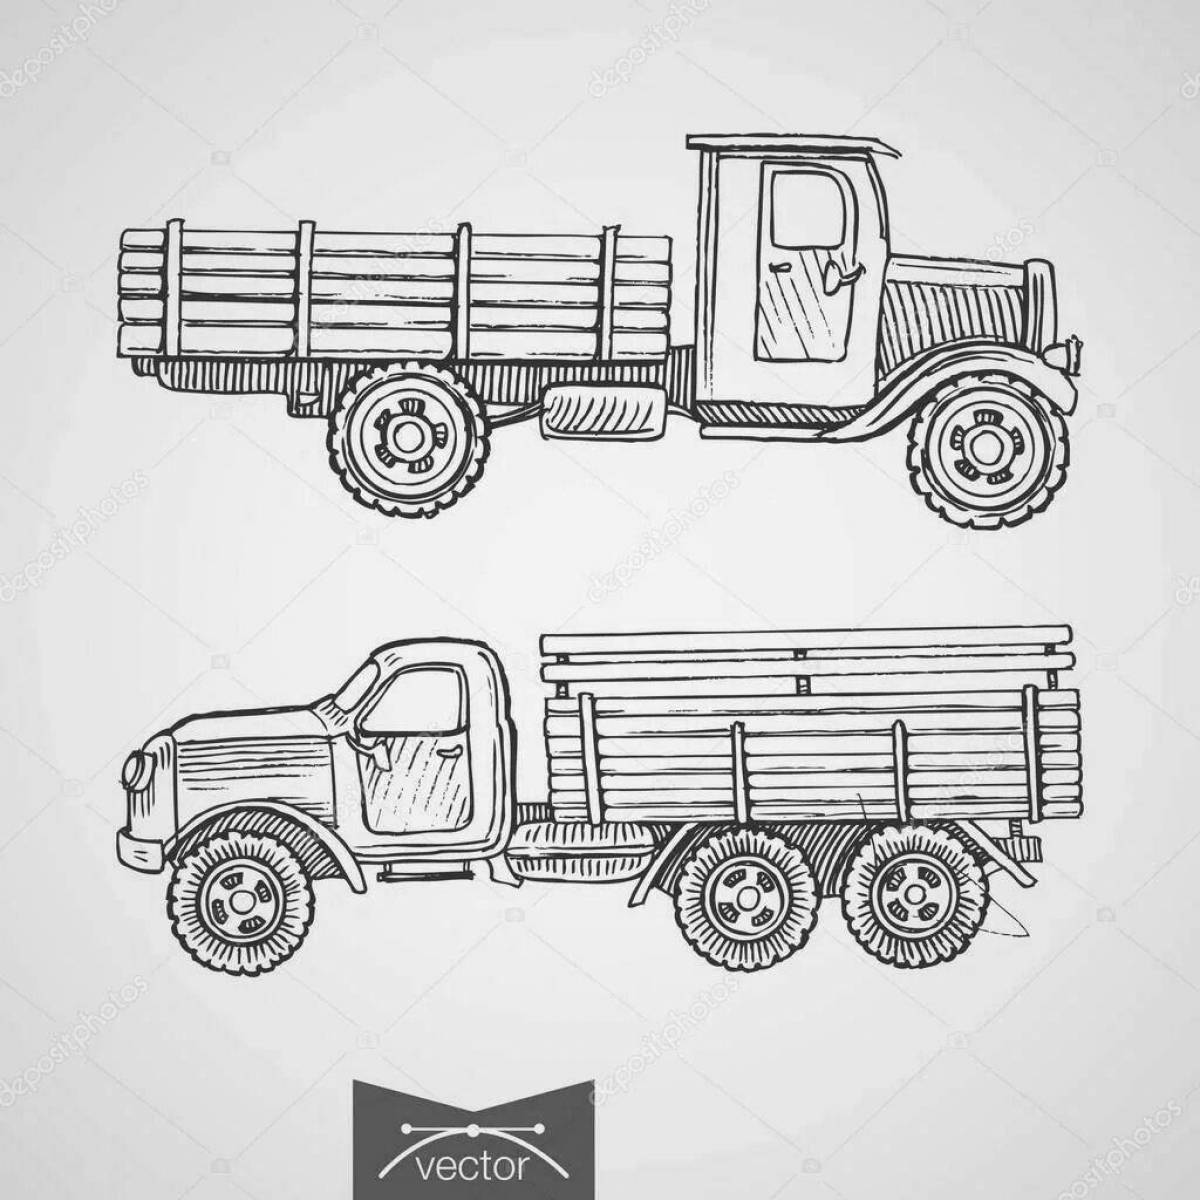 Great truck coloring book for kids